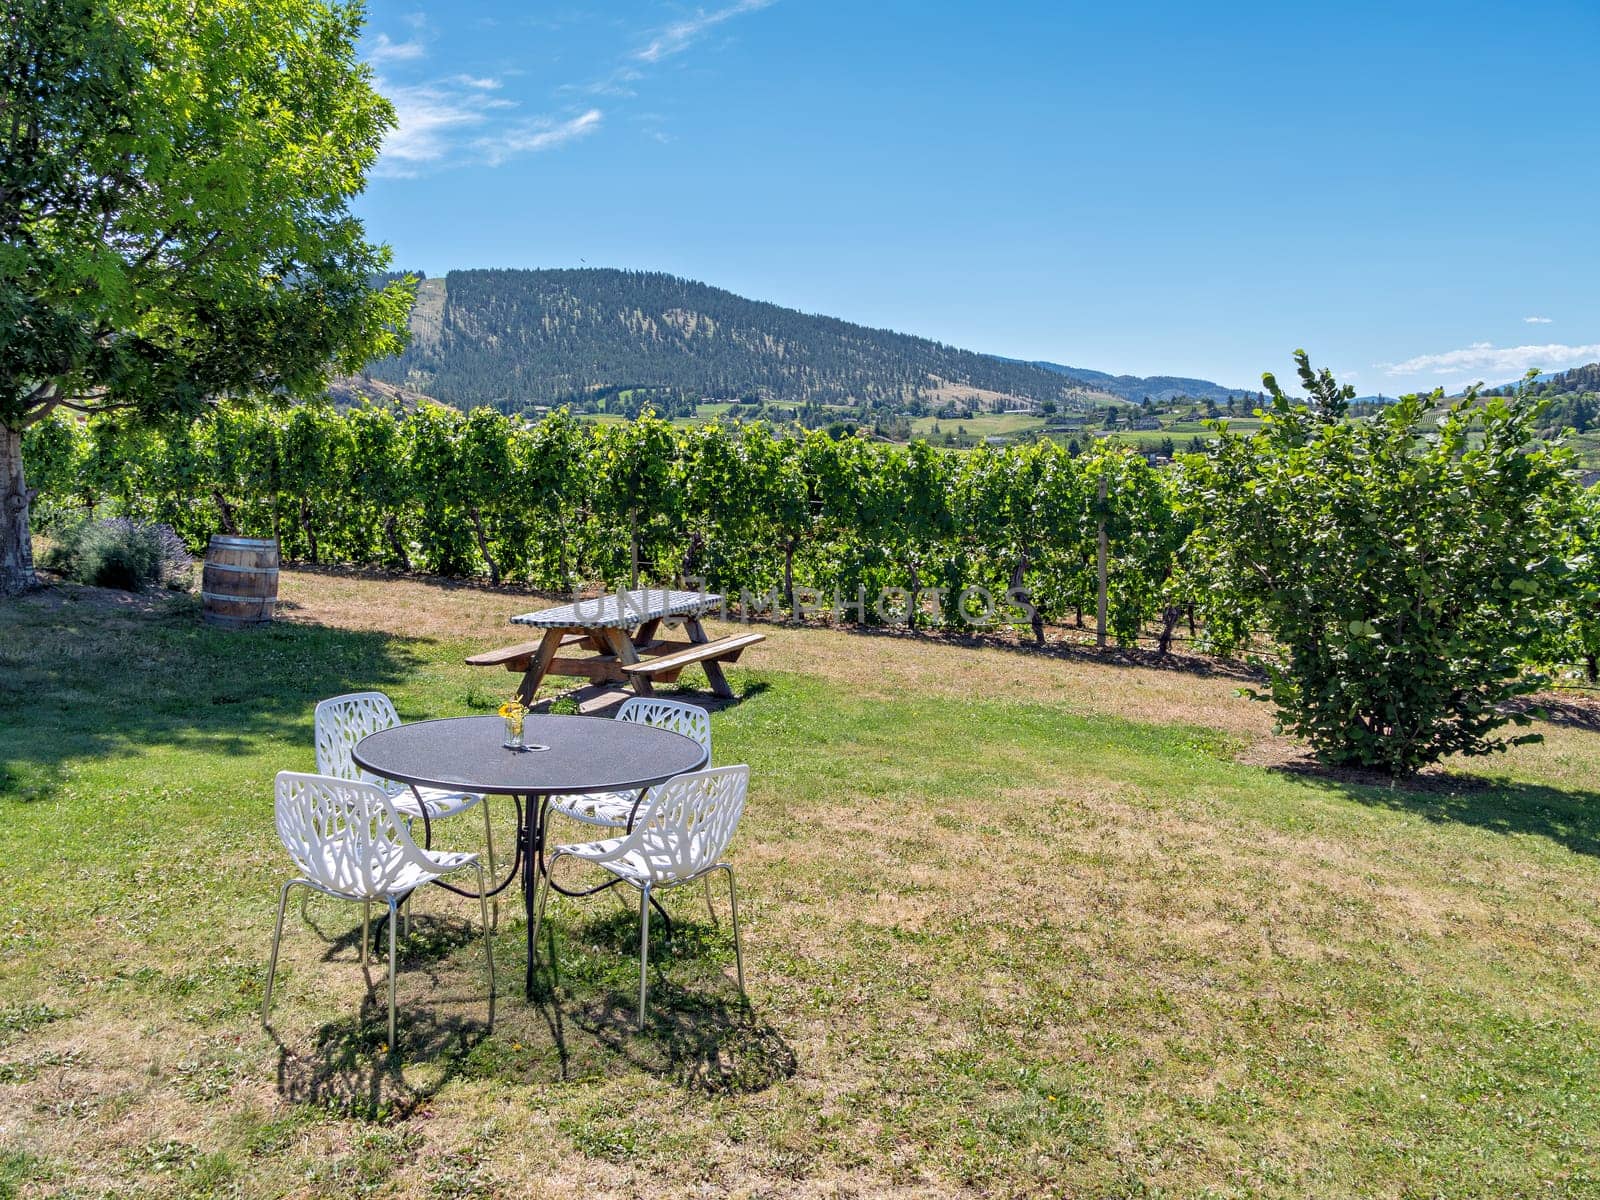 Rural cafe with beautiful pastoral overview of vineyard and mountains by Imagenet